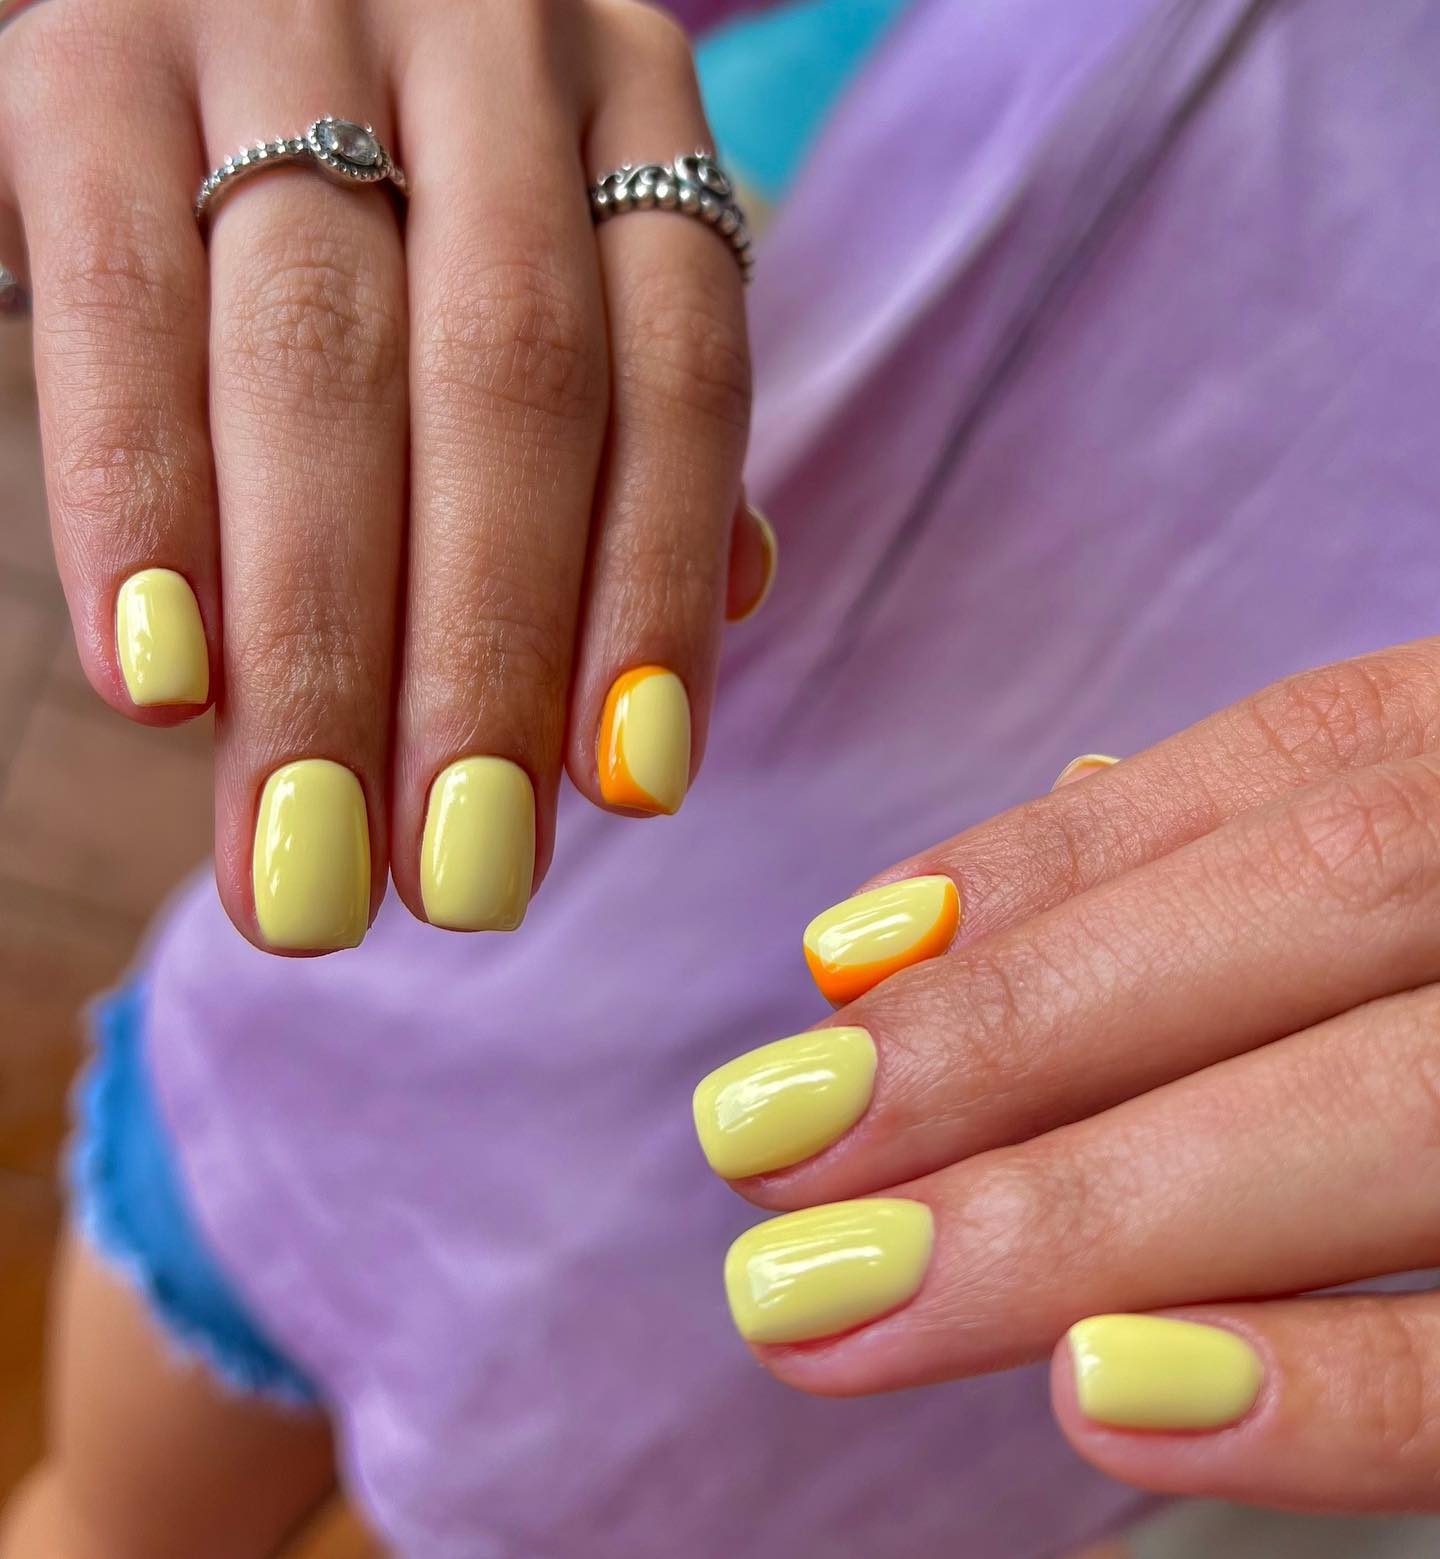 Wanna have cool short nails? Then, yellow nails designs are definitely for you. If you're looking for a nail color that goes well with everyday wear, go for this color.